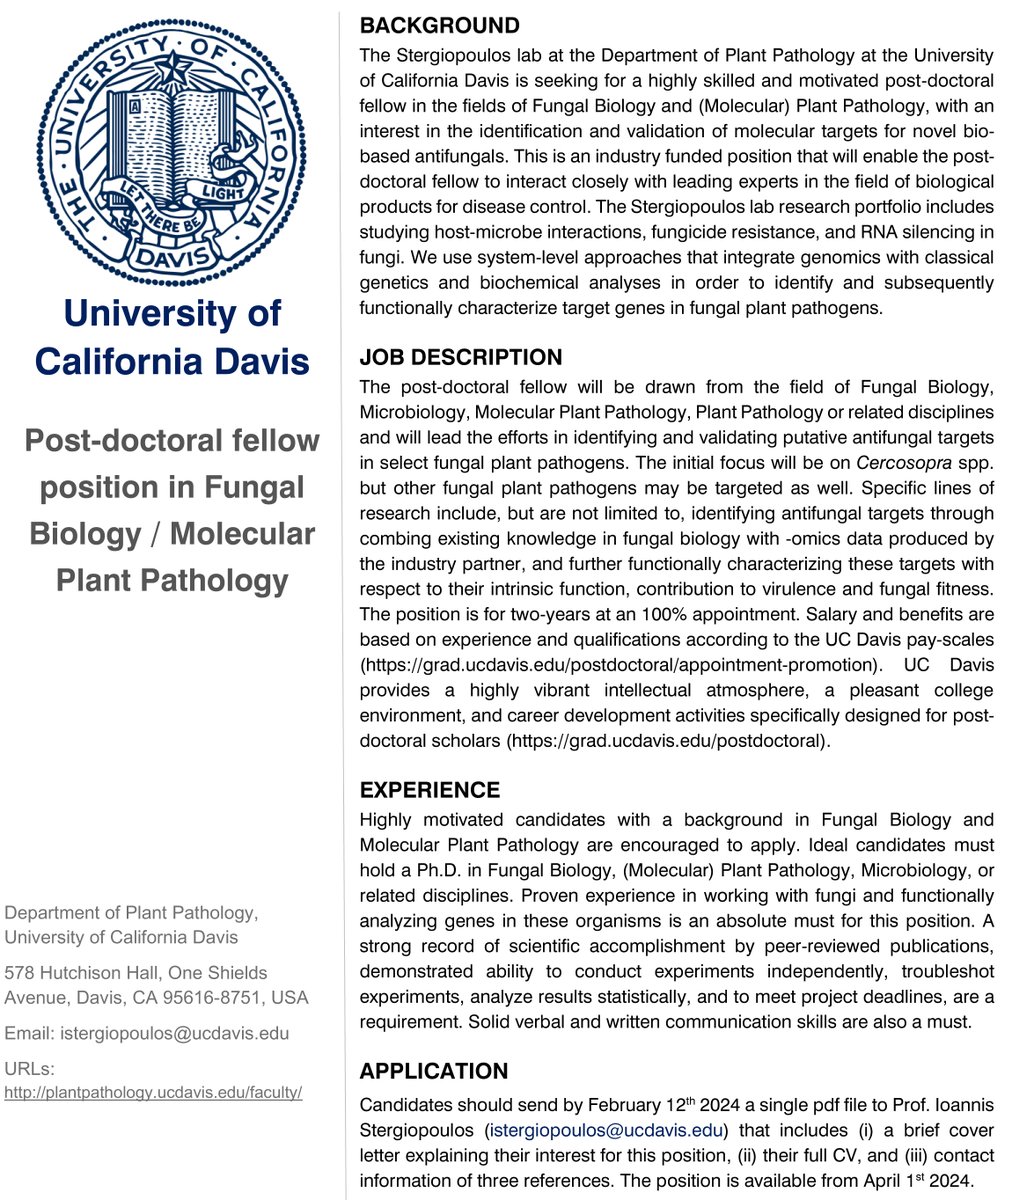 We are hiring! Please RT. A post-doctoral position is available in my lab in the fields of fungal biology & molecular plant pathology. Candidates interested in the identification and validation of molecular targets for novel bio-based antifungal agents are encouraged to apply.